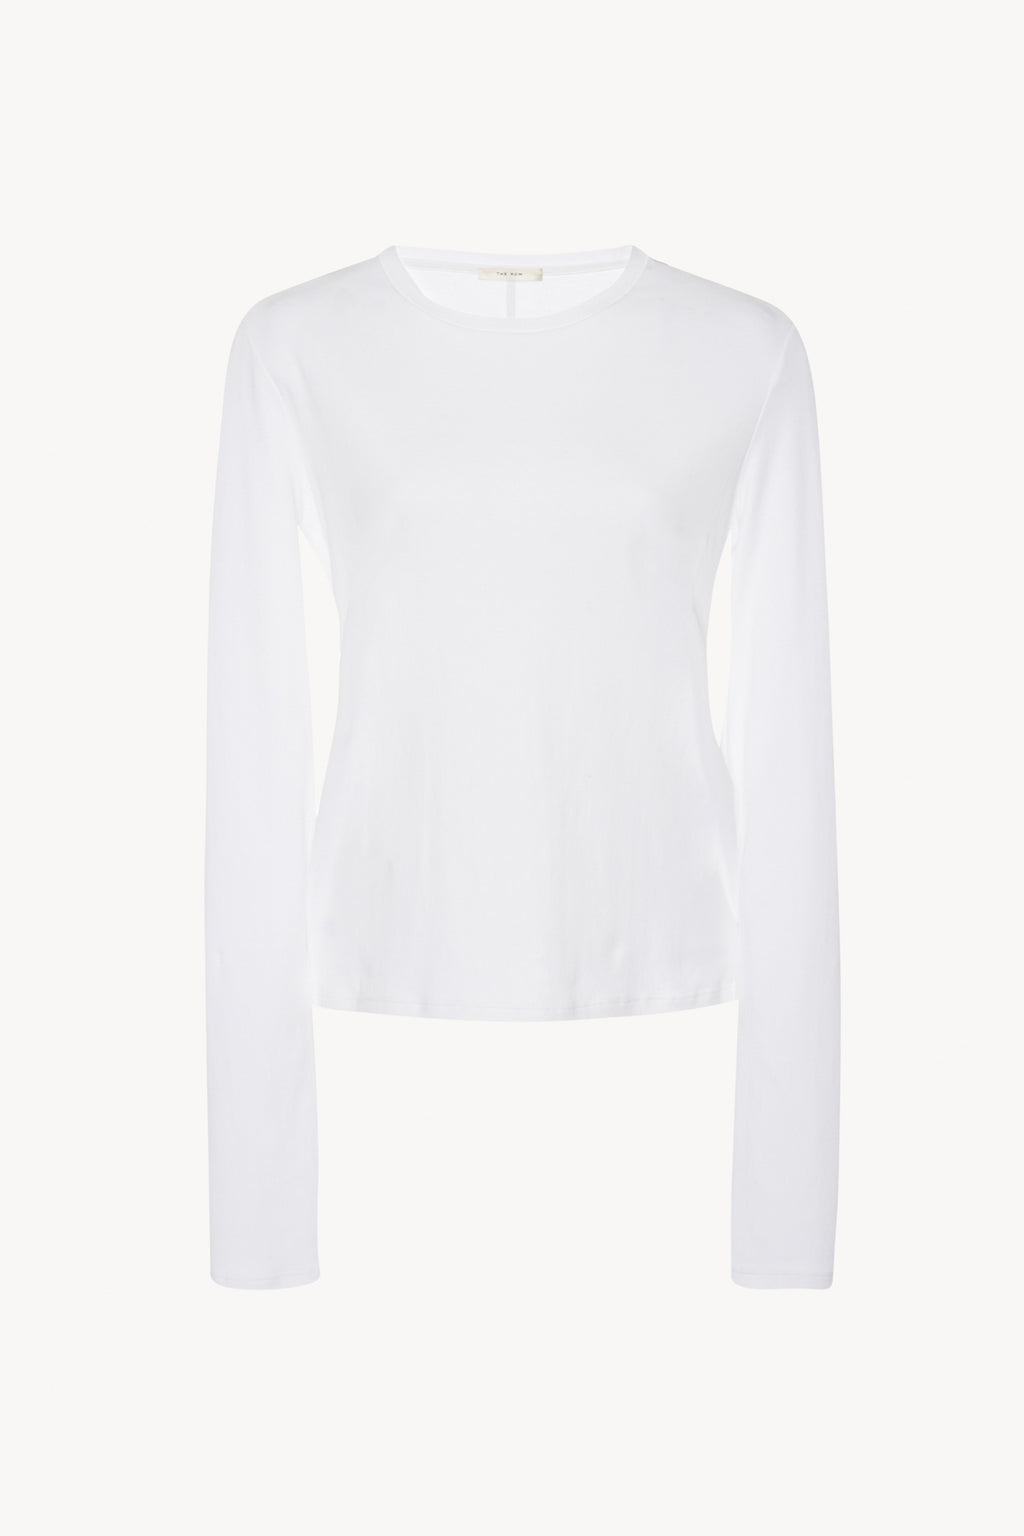 Sherman Top White in Cotton – The Row